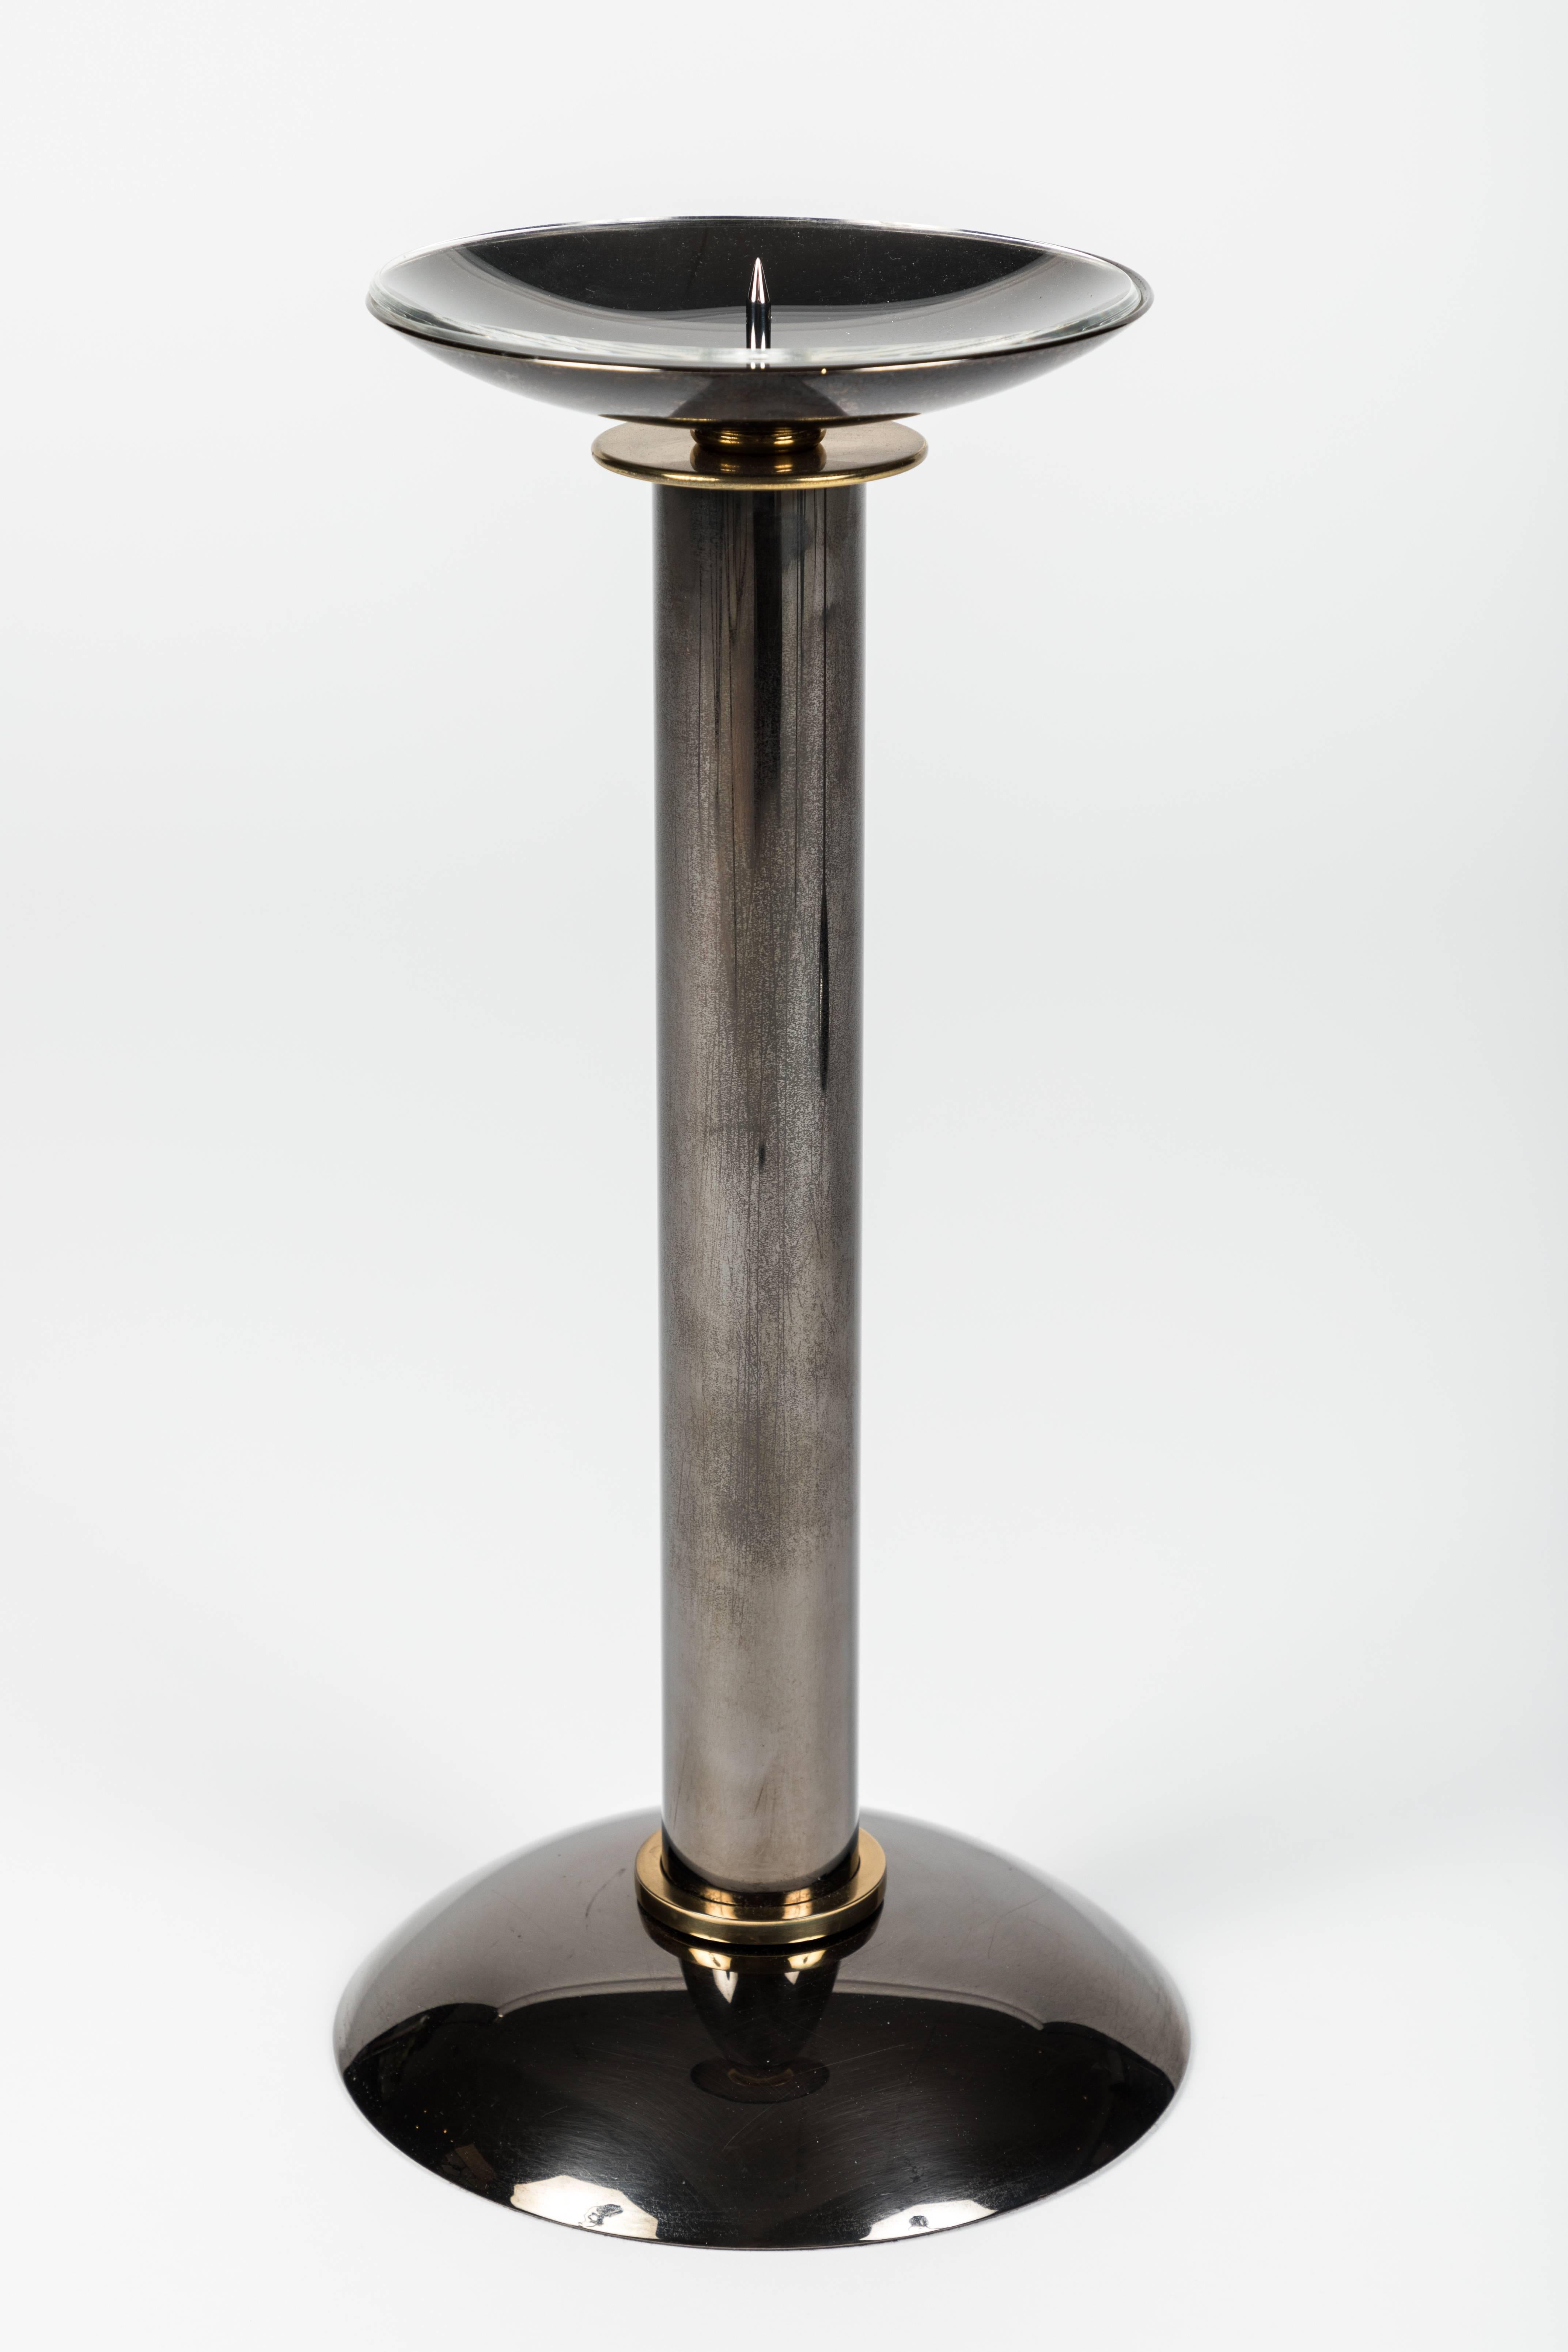 These signature Karl Springer candlesticks are composed of gunmetal bodies with brass accents. The original Lucite liners are included.

Karl Springer (born in Berlin) was a designer and manufacturer of luxury furniture and a wide array of